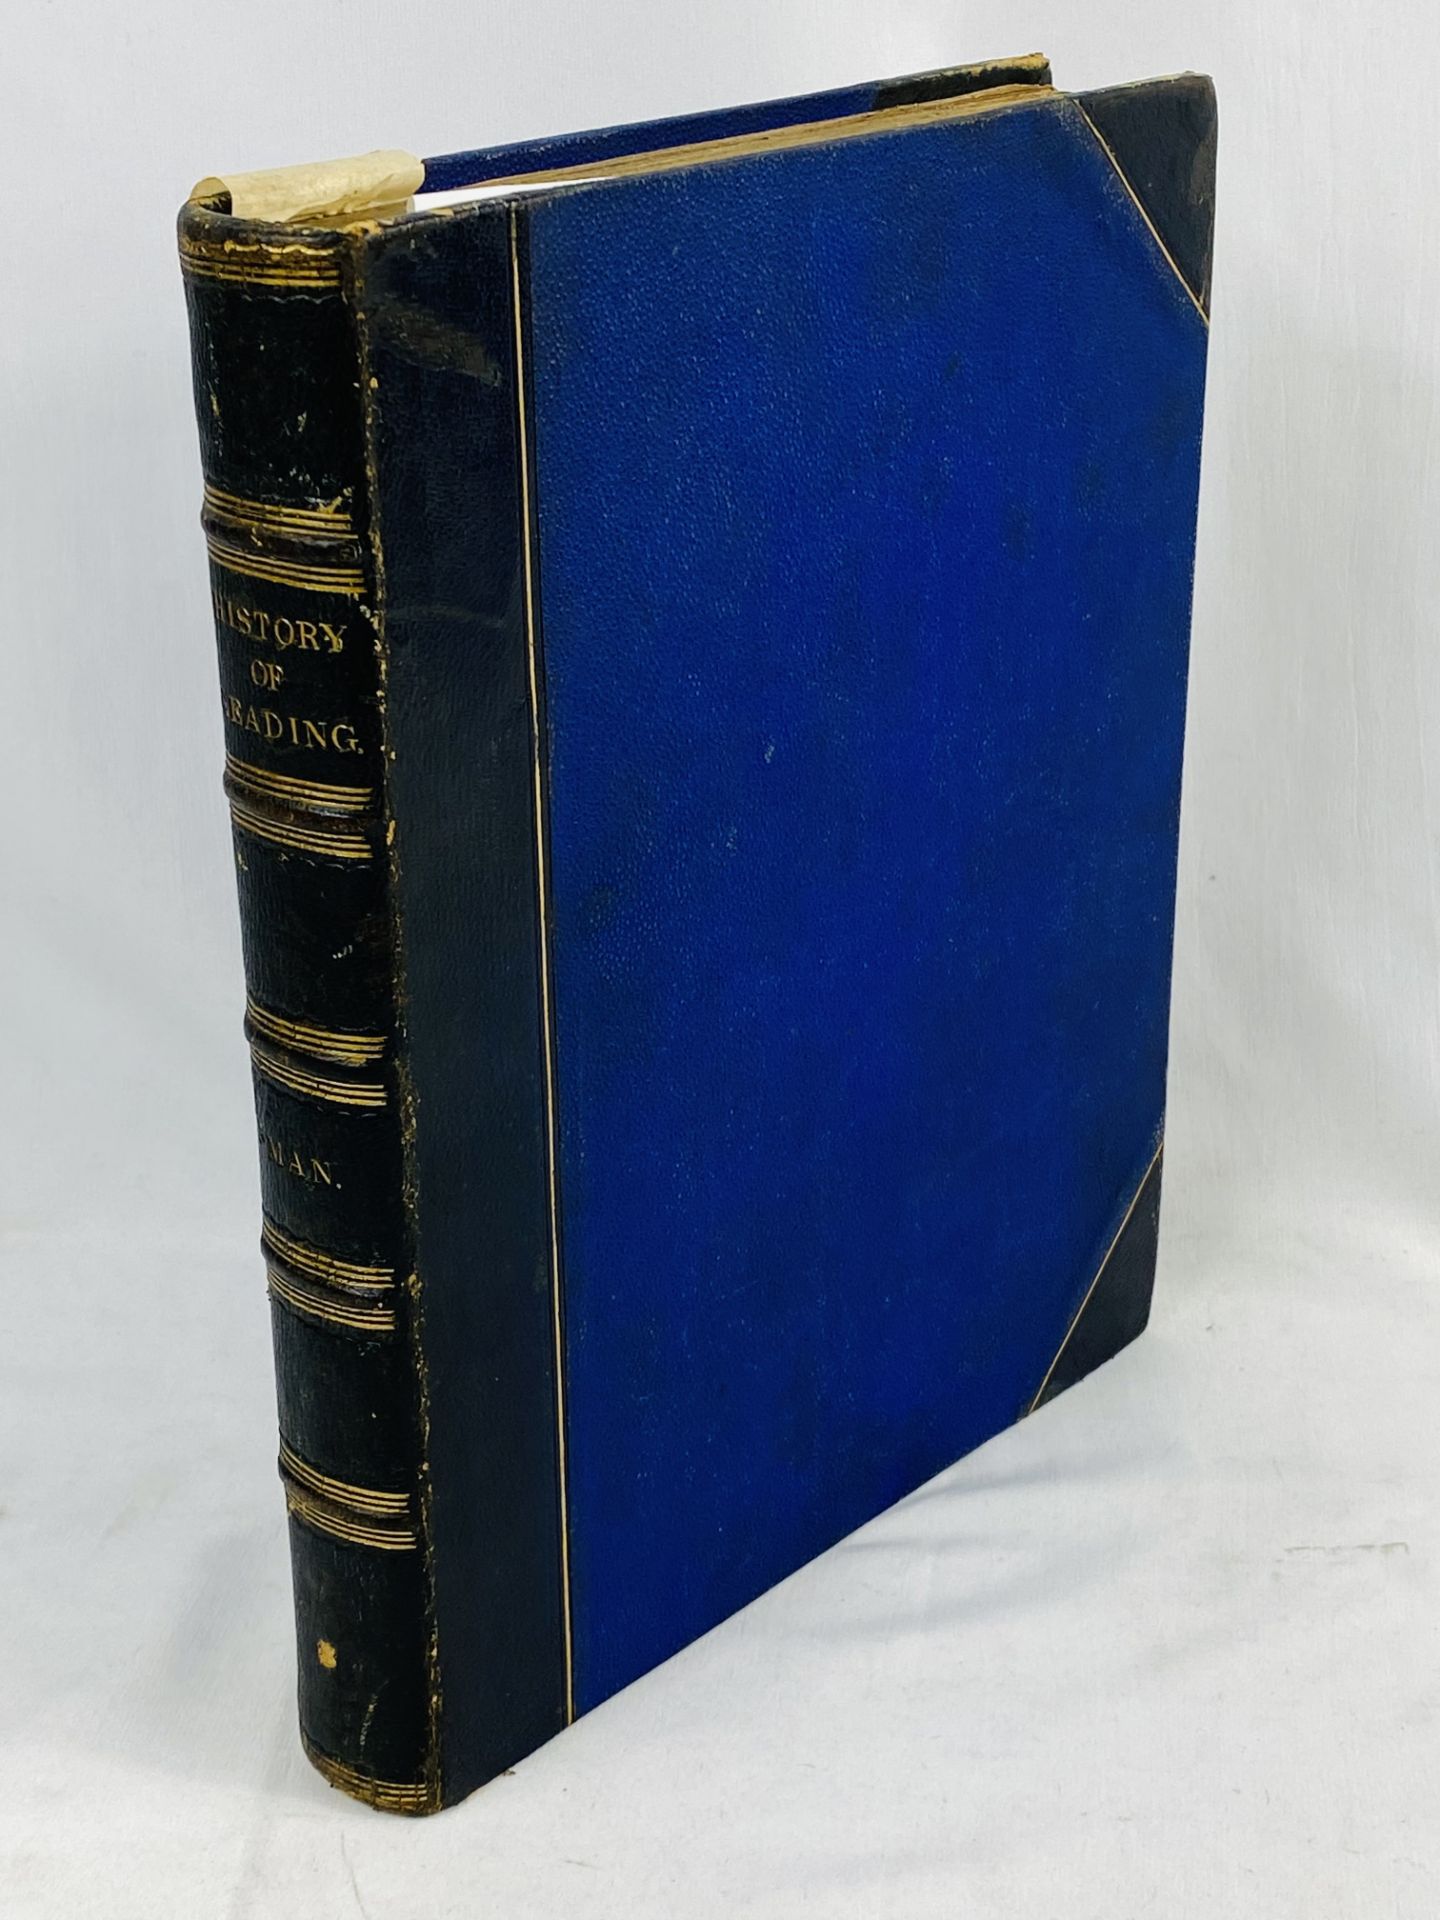 The History and Antiquities of the Borough of Reading by John Man, 1816